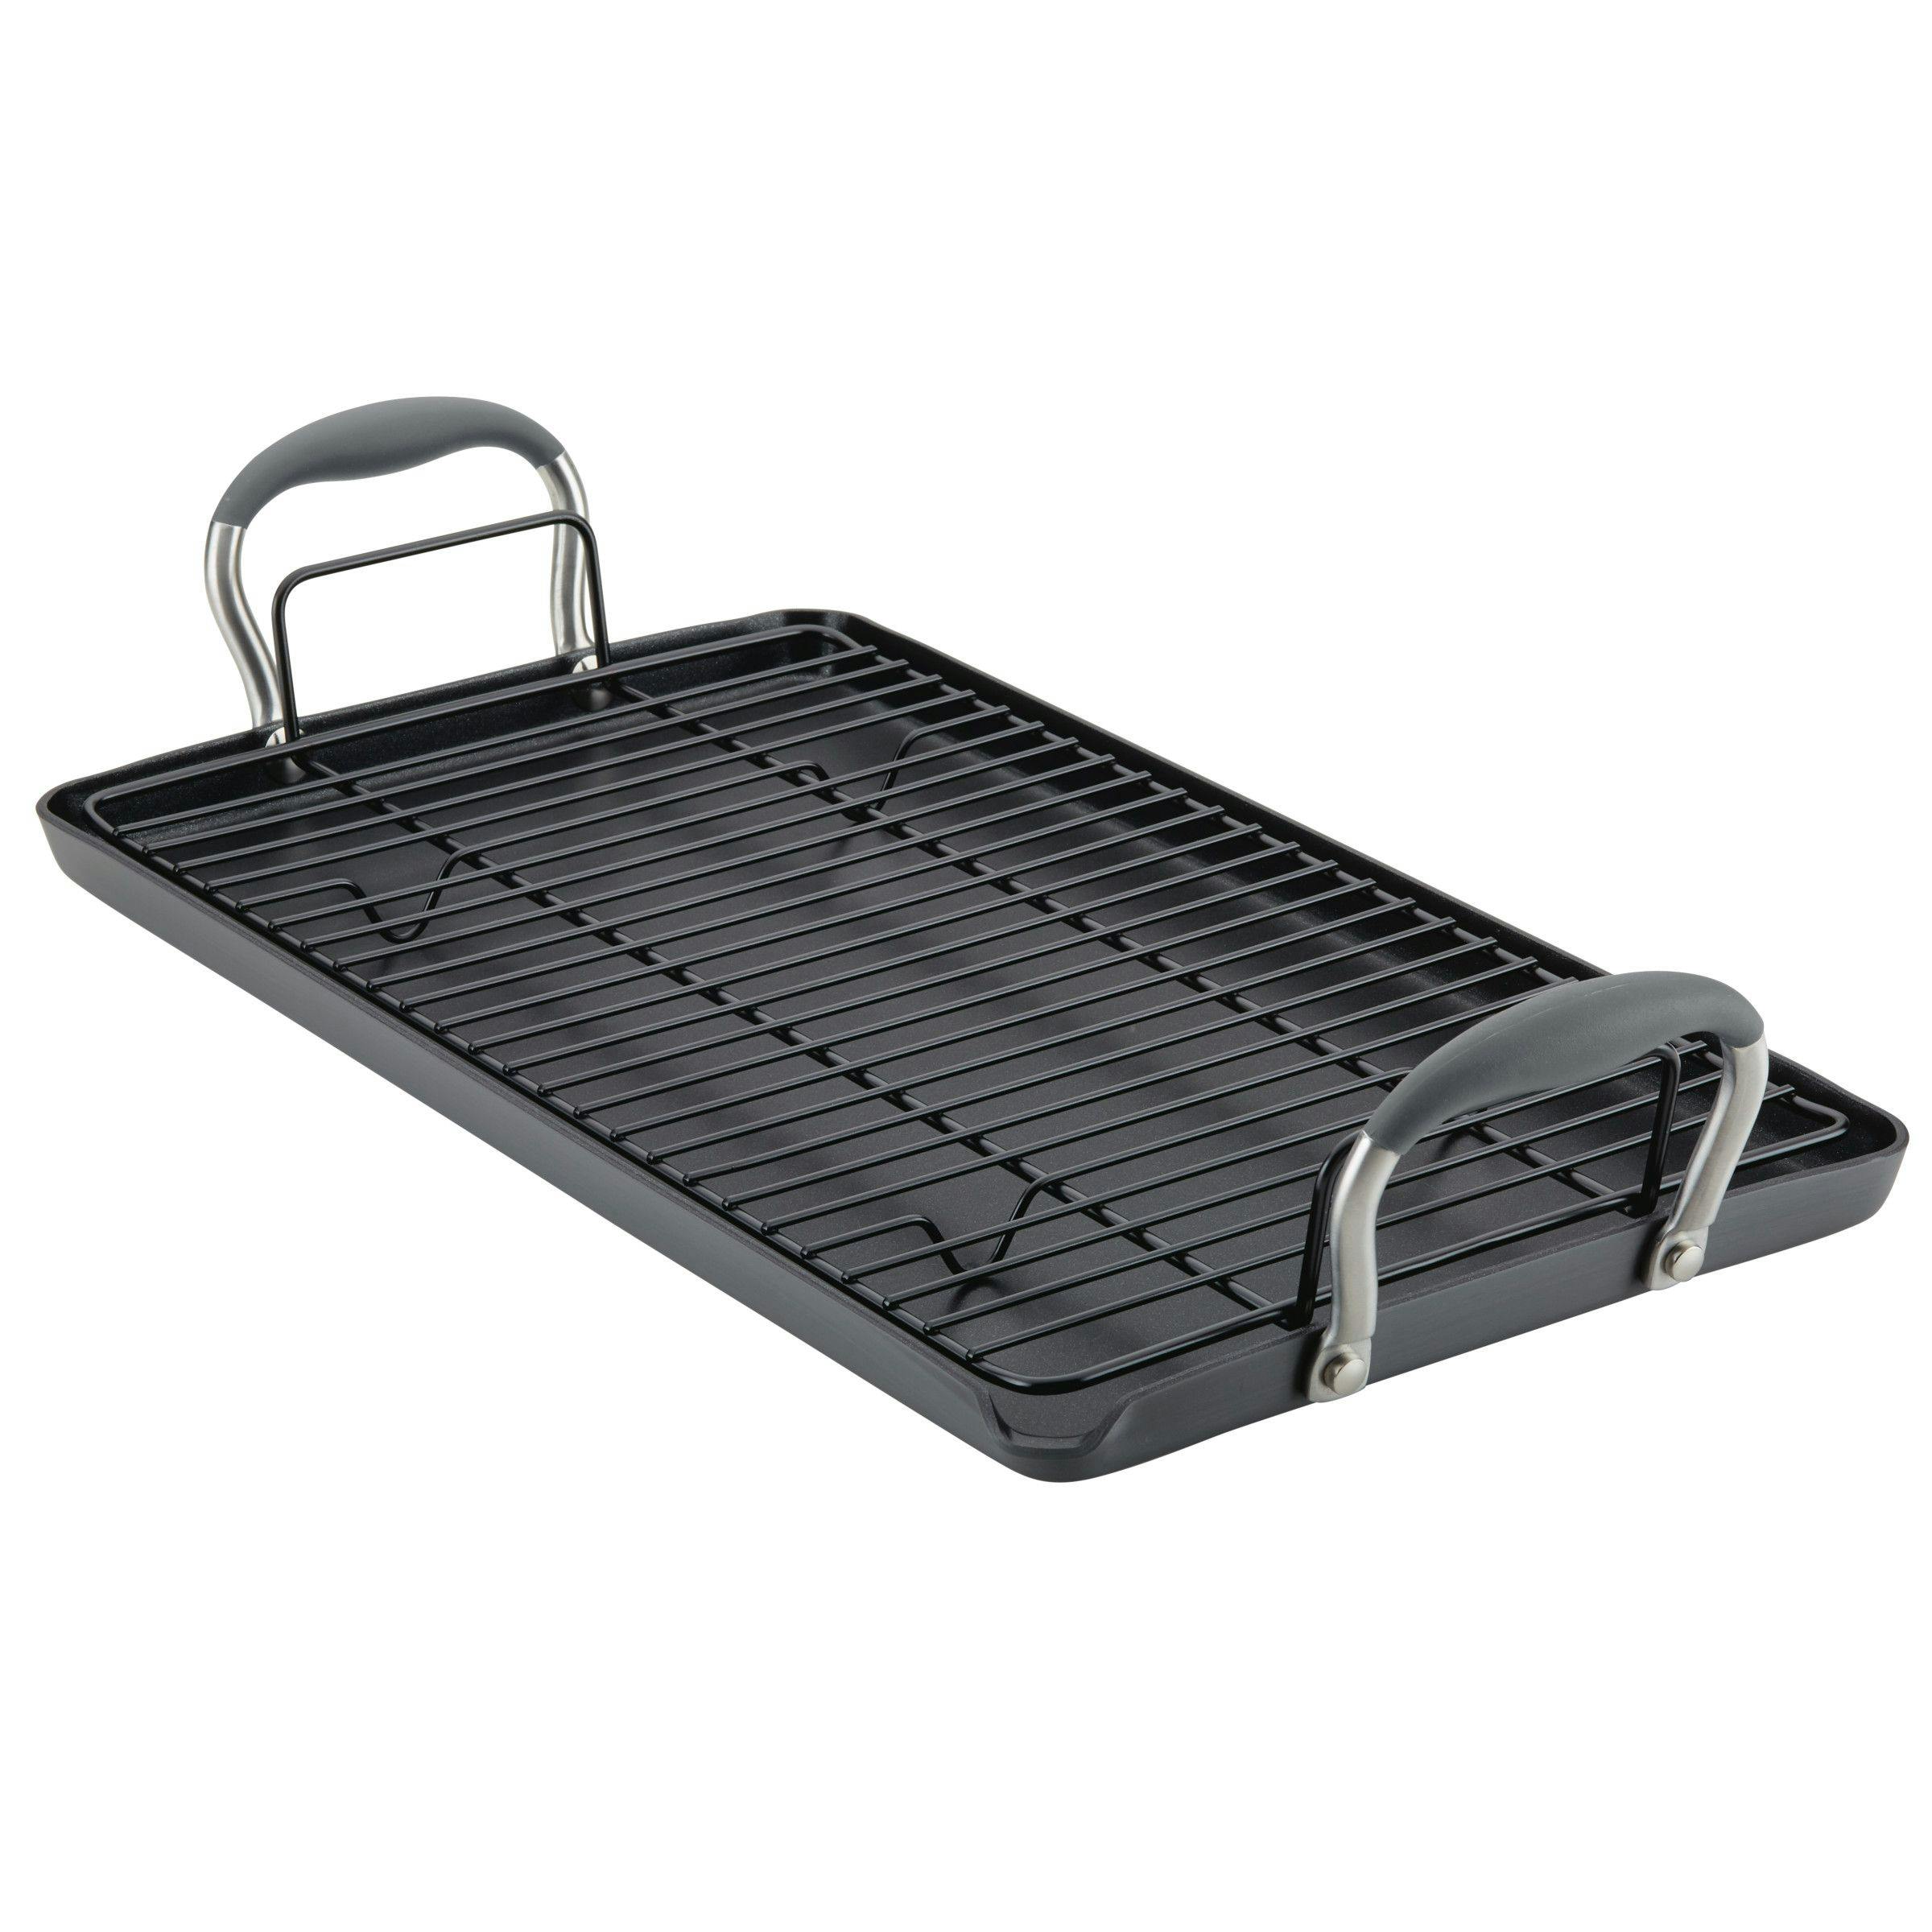 Anolon Advanced Home Hard Anodized Nonstick Double Burner Griddle with Roasting Rack, 2-Piece